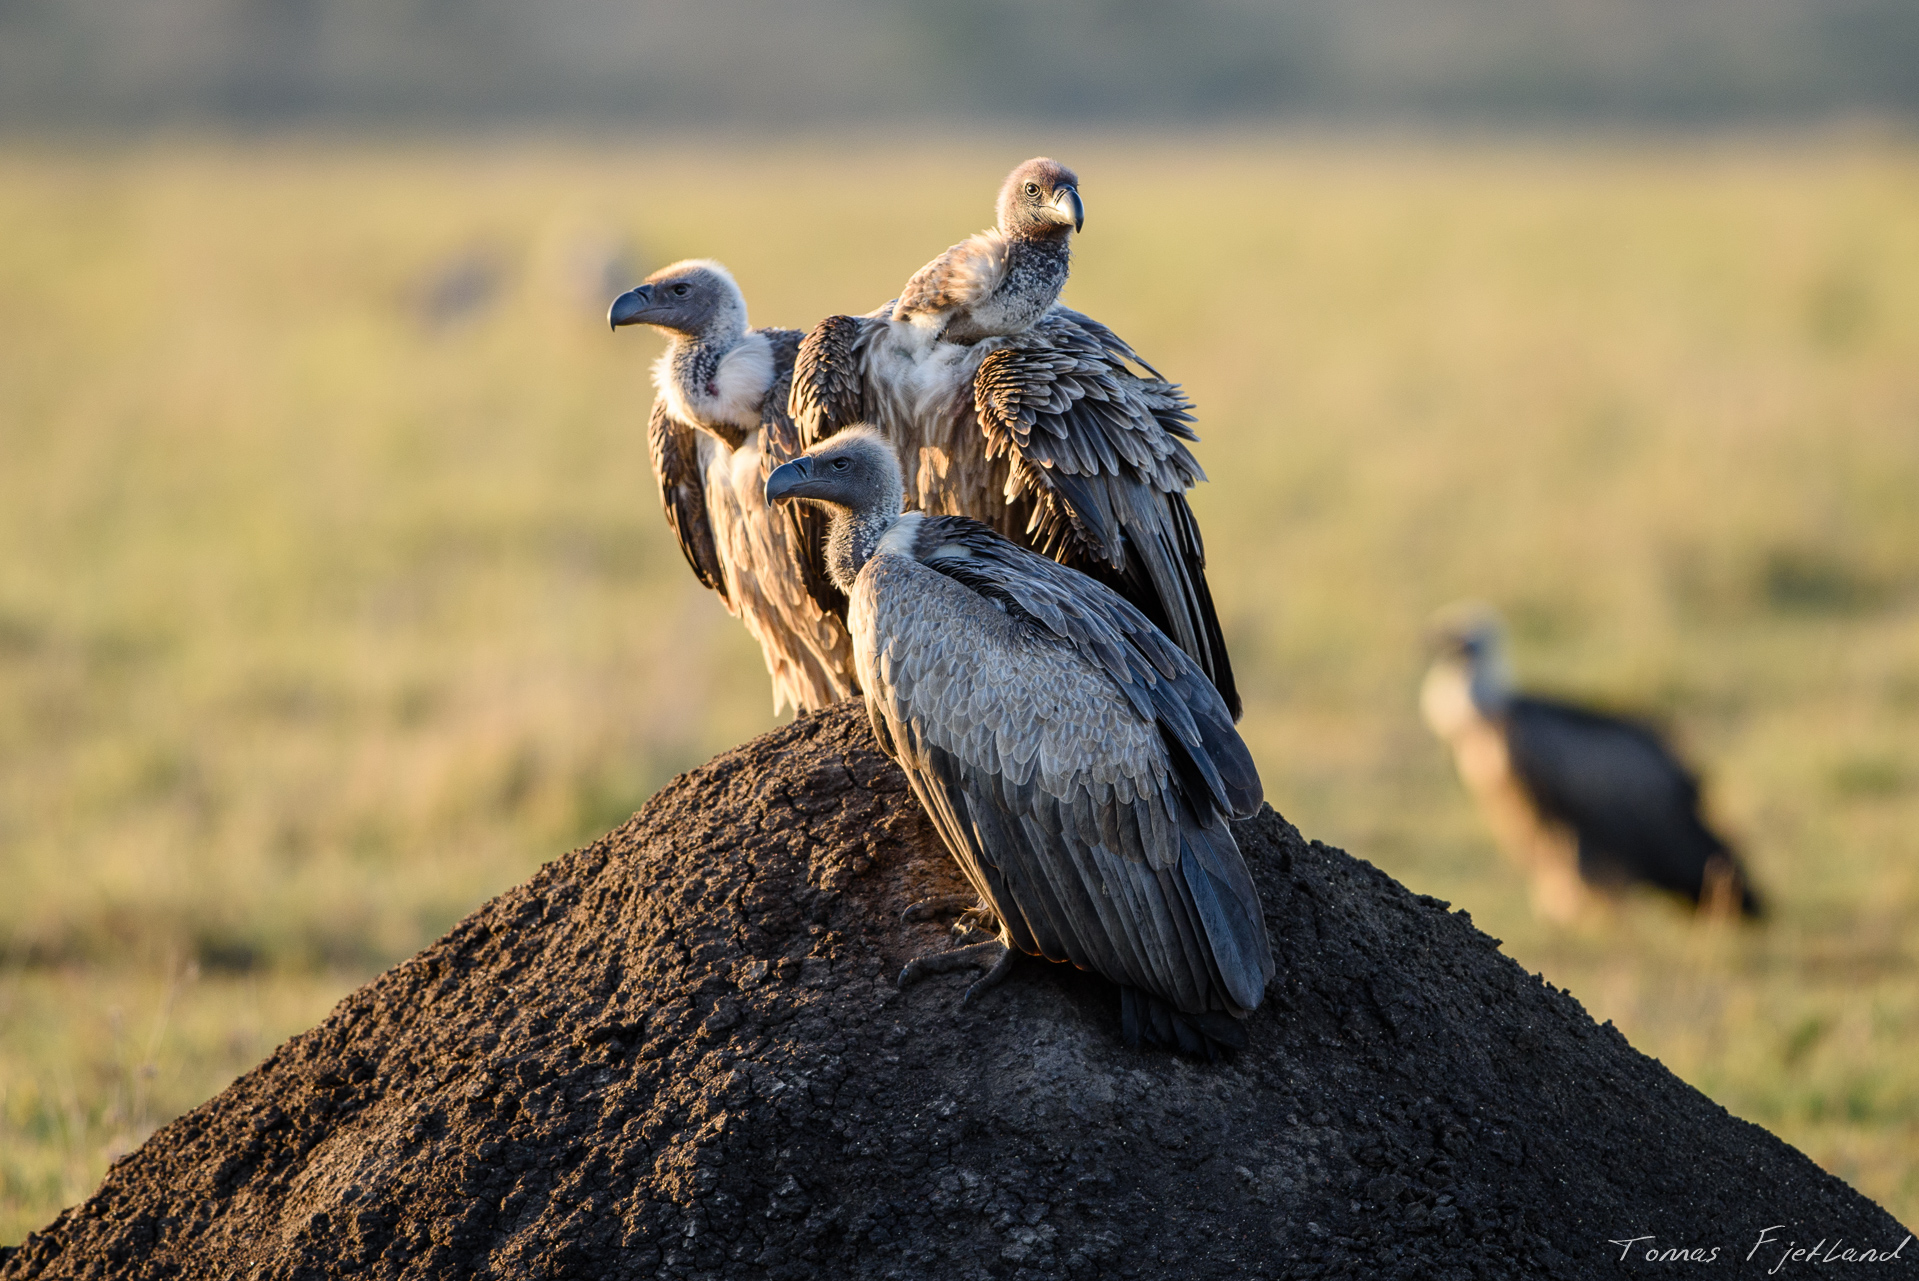 a group of vultures keep watch for any scraps of food that might become unguarded.